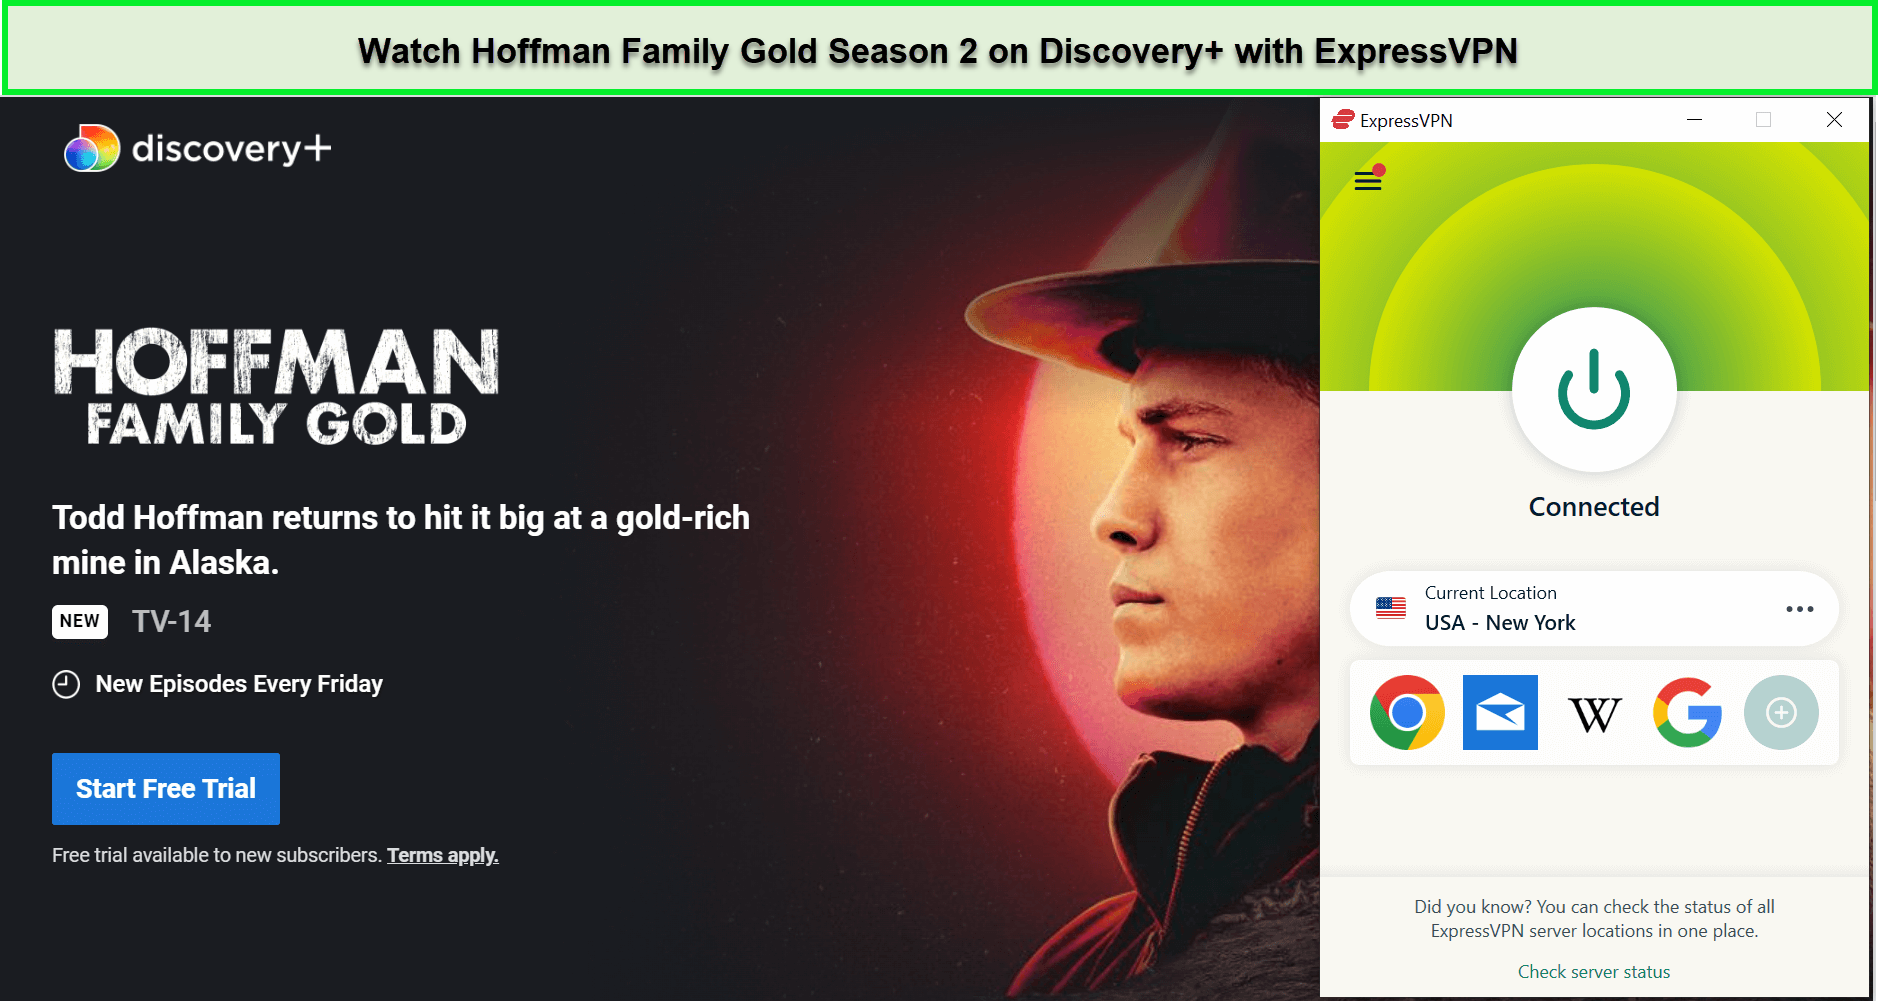 Watch-Hoffman-Family-Gold-Season-2-in-sg-on-Discovery-with-ExpressVPN.